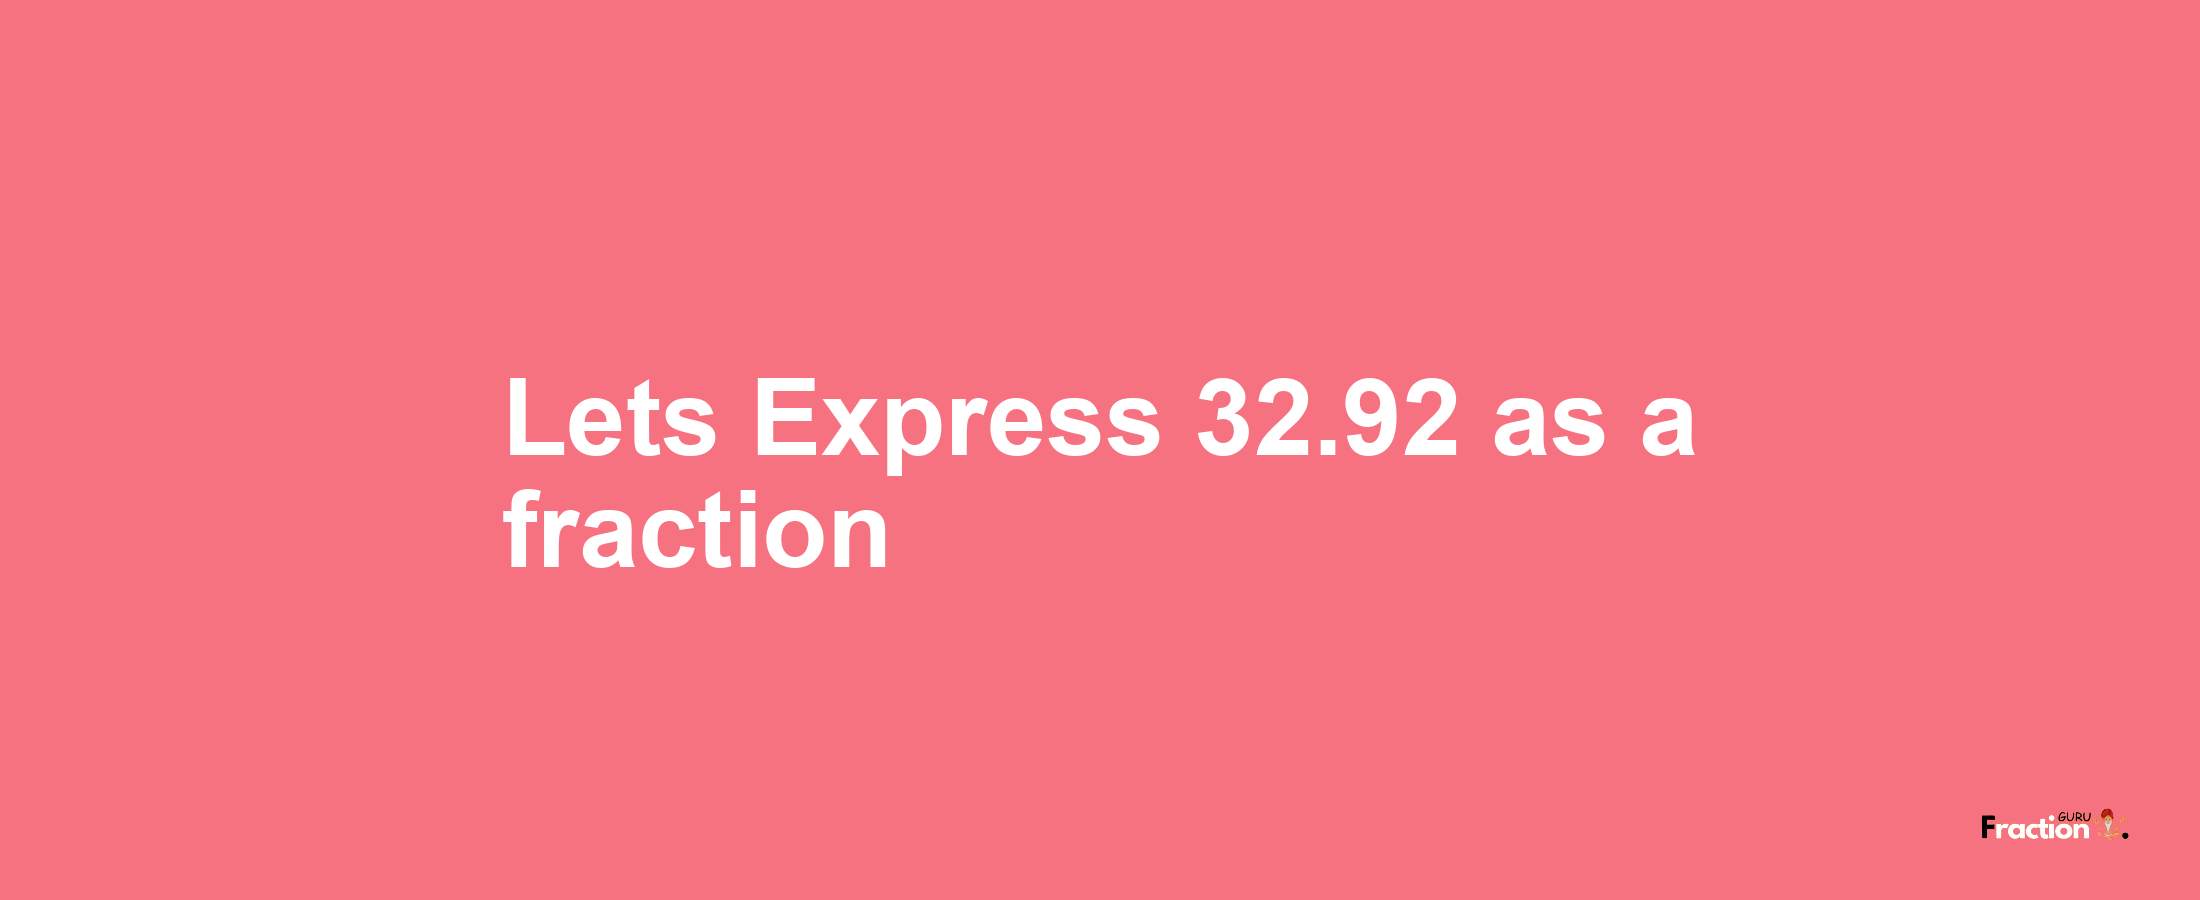 Lets Express 32.92 as afraction